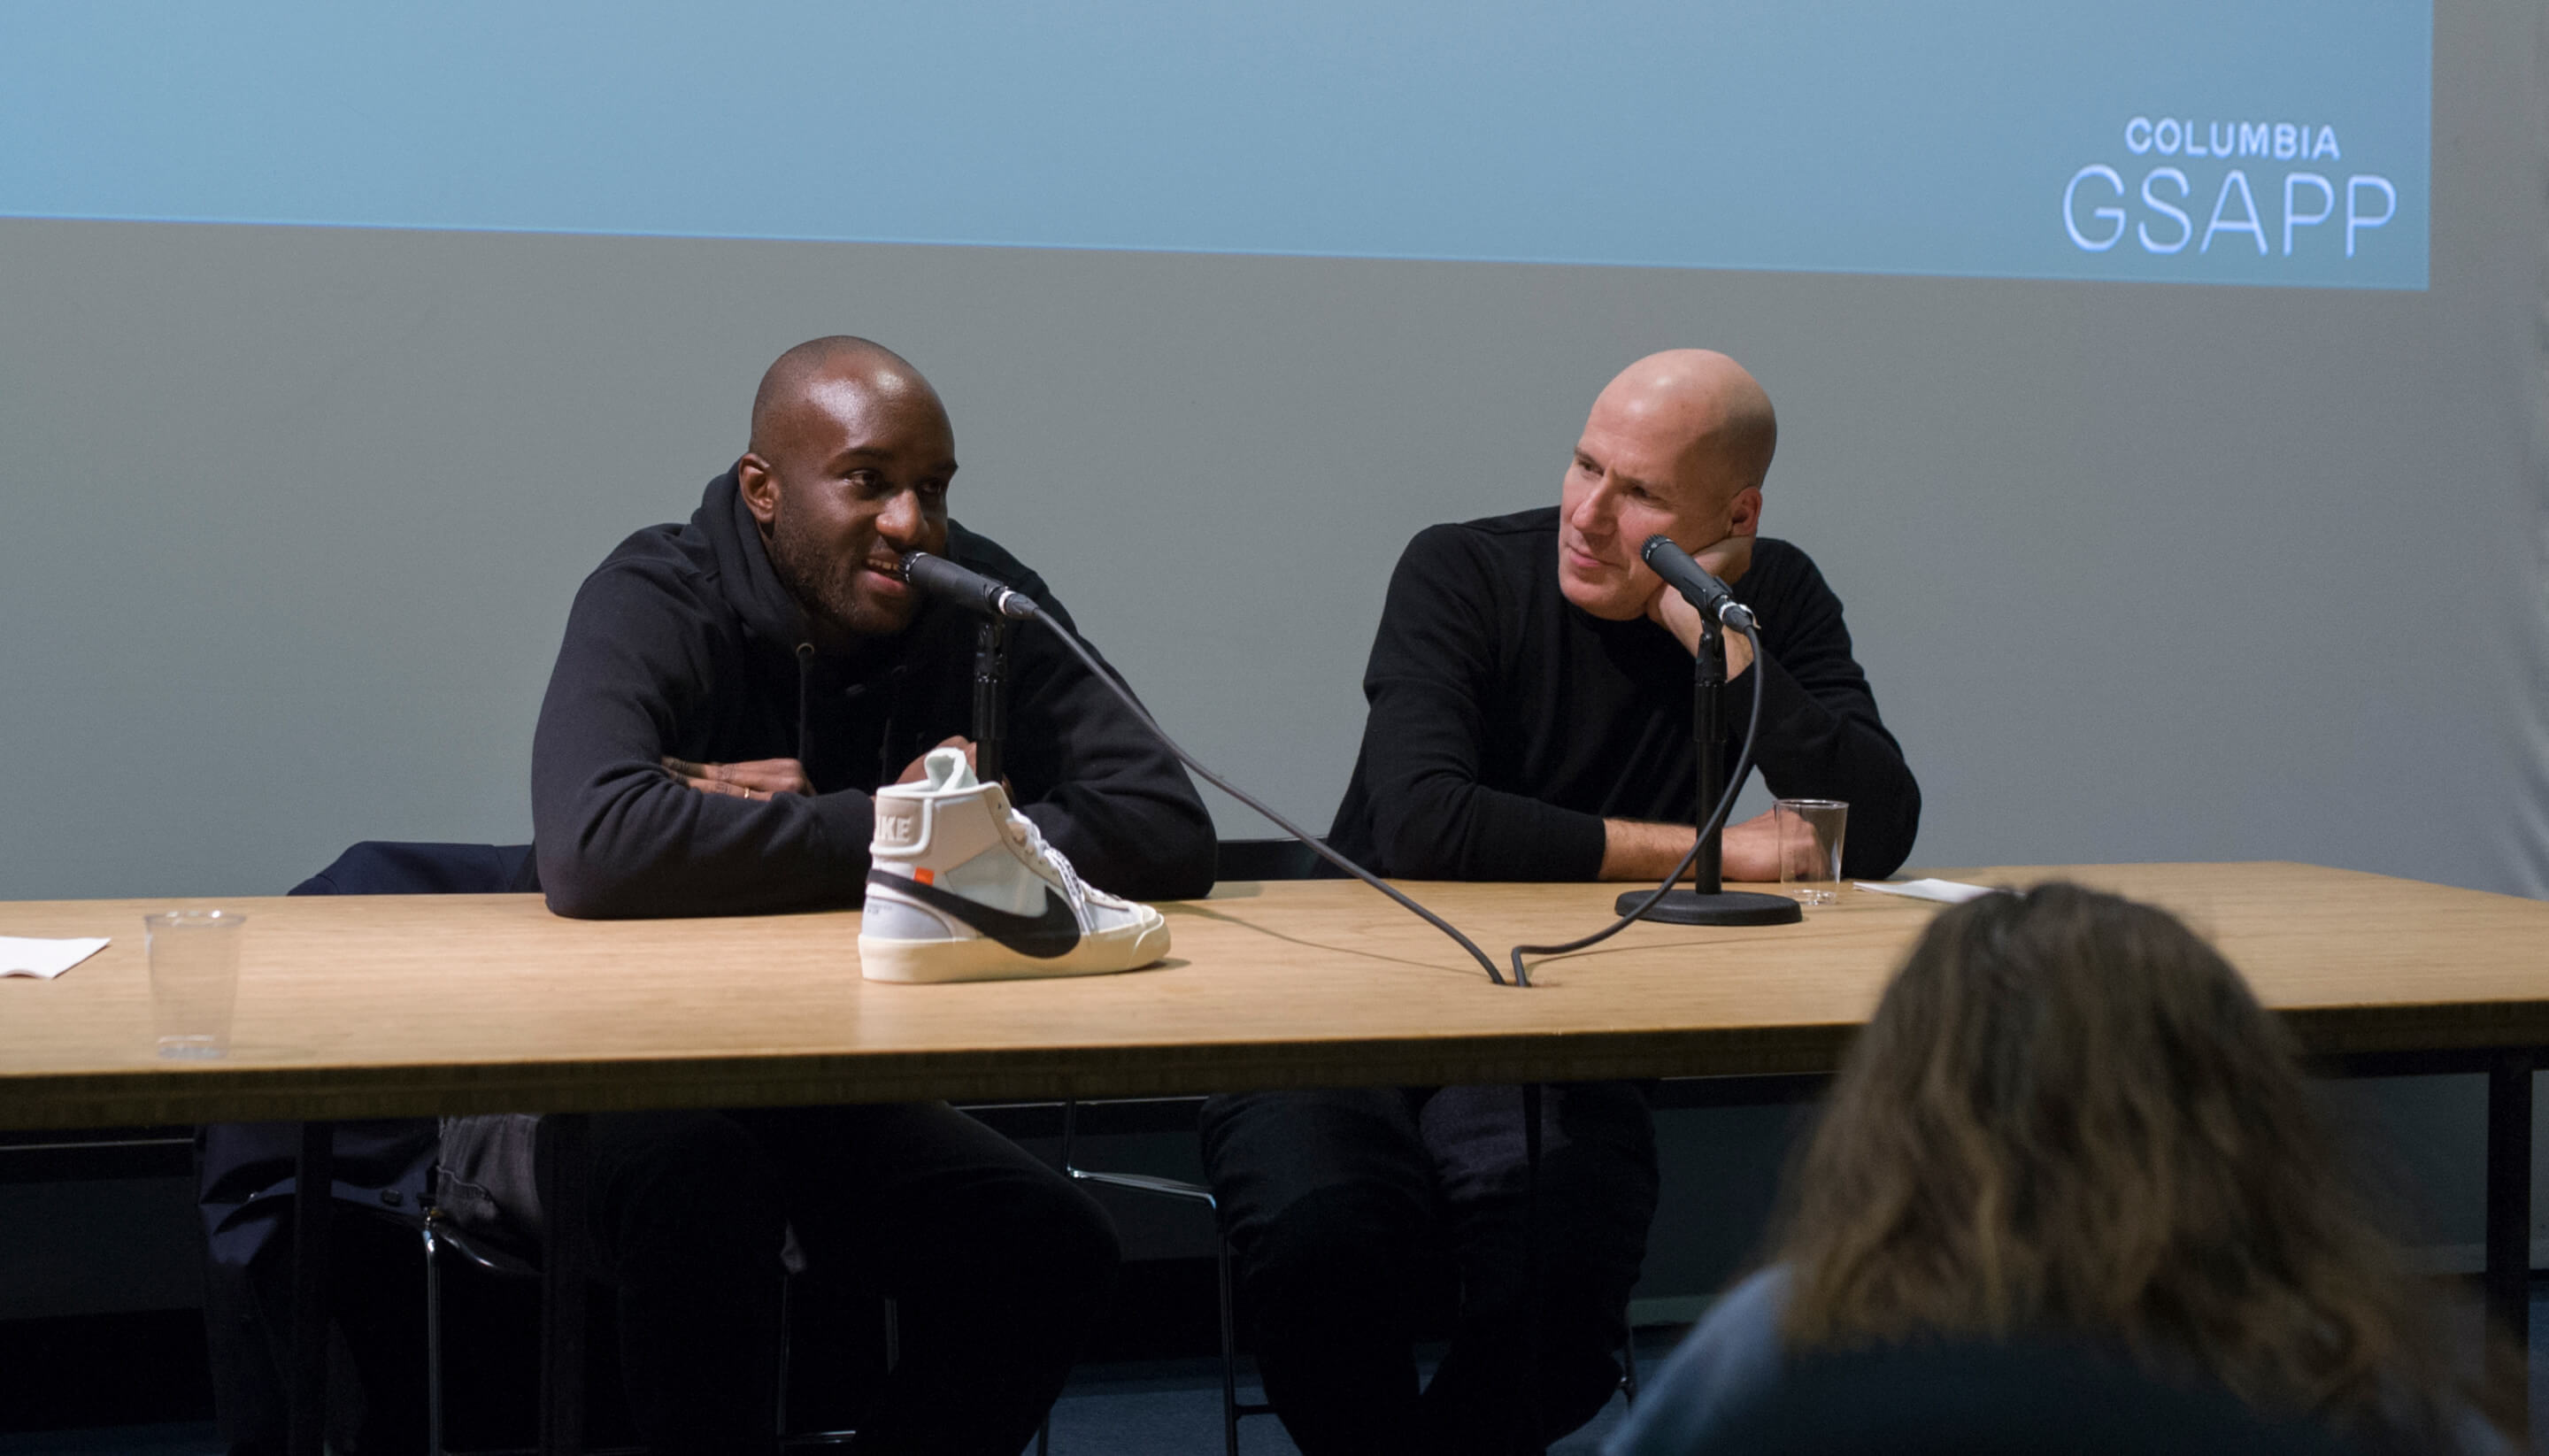 Virgil Abloh, visionary designer, artist and creative director, passes away  aged 41